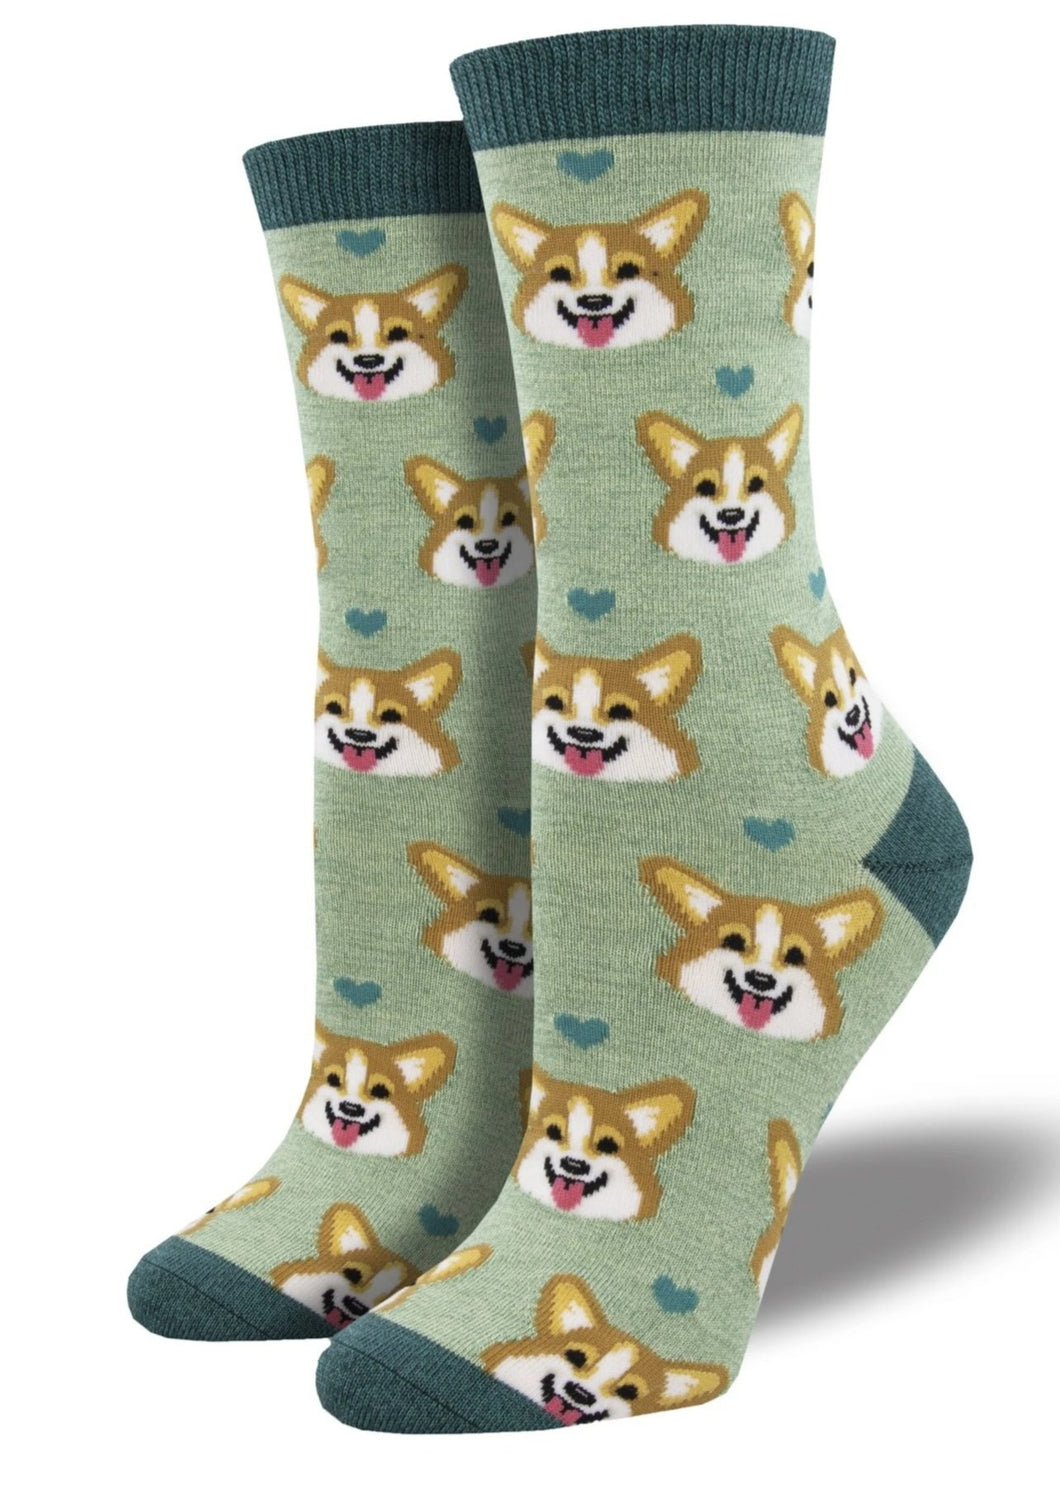 Heather Green with Corgi Heads. Soft, Breathable, Moisture Wicking, Antibacterial, Hypoallergenic, Amazing Socks! One Size Fits Most (Women's 5-11) Fabrication: 66% Rayon from Bamboo, 32% Nylon, 2% Spandex SockSmith $20.00